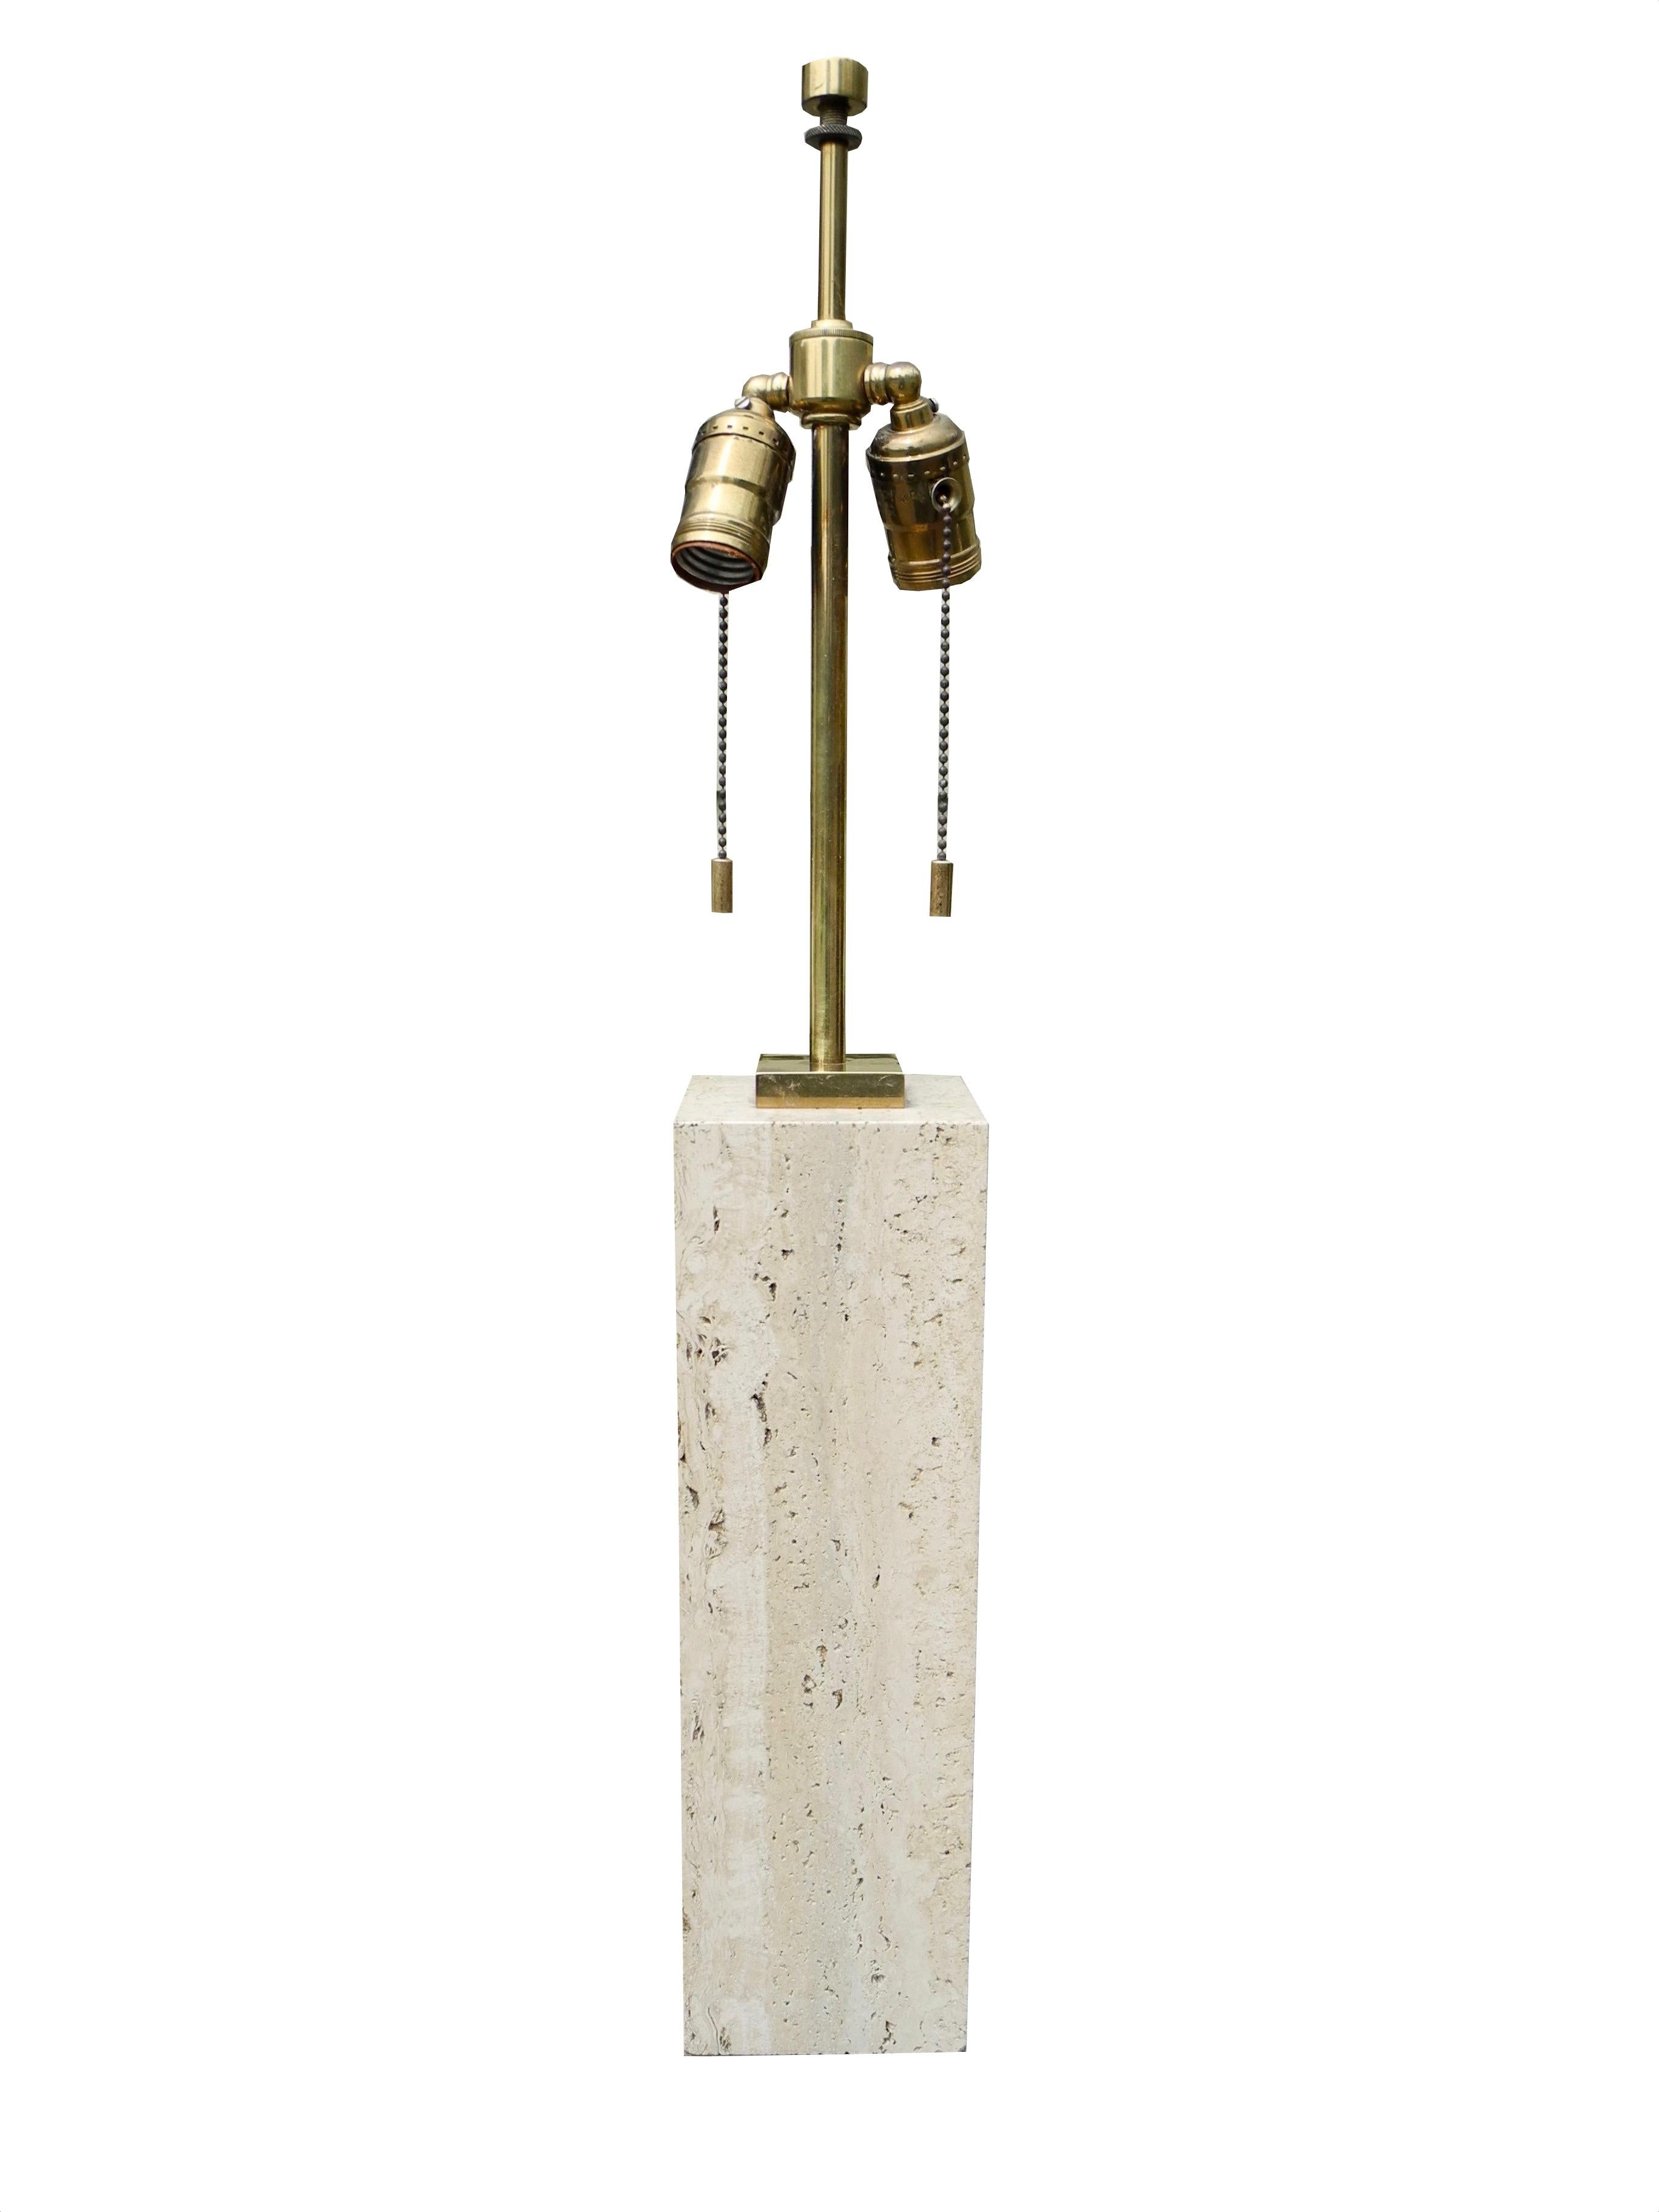 This block of solid travertine stone with brass hardware and fittings was designed by TH Robsjohn-Gibbings in the 1950s. Its design is handsome and modern. The stone measures 4 x 4 x 13.5 inches. The height to the top of the finial is 27.25